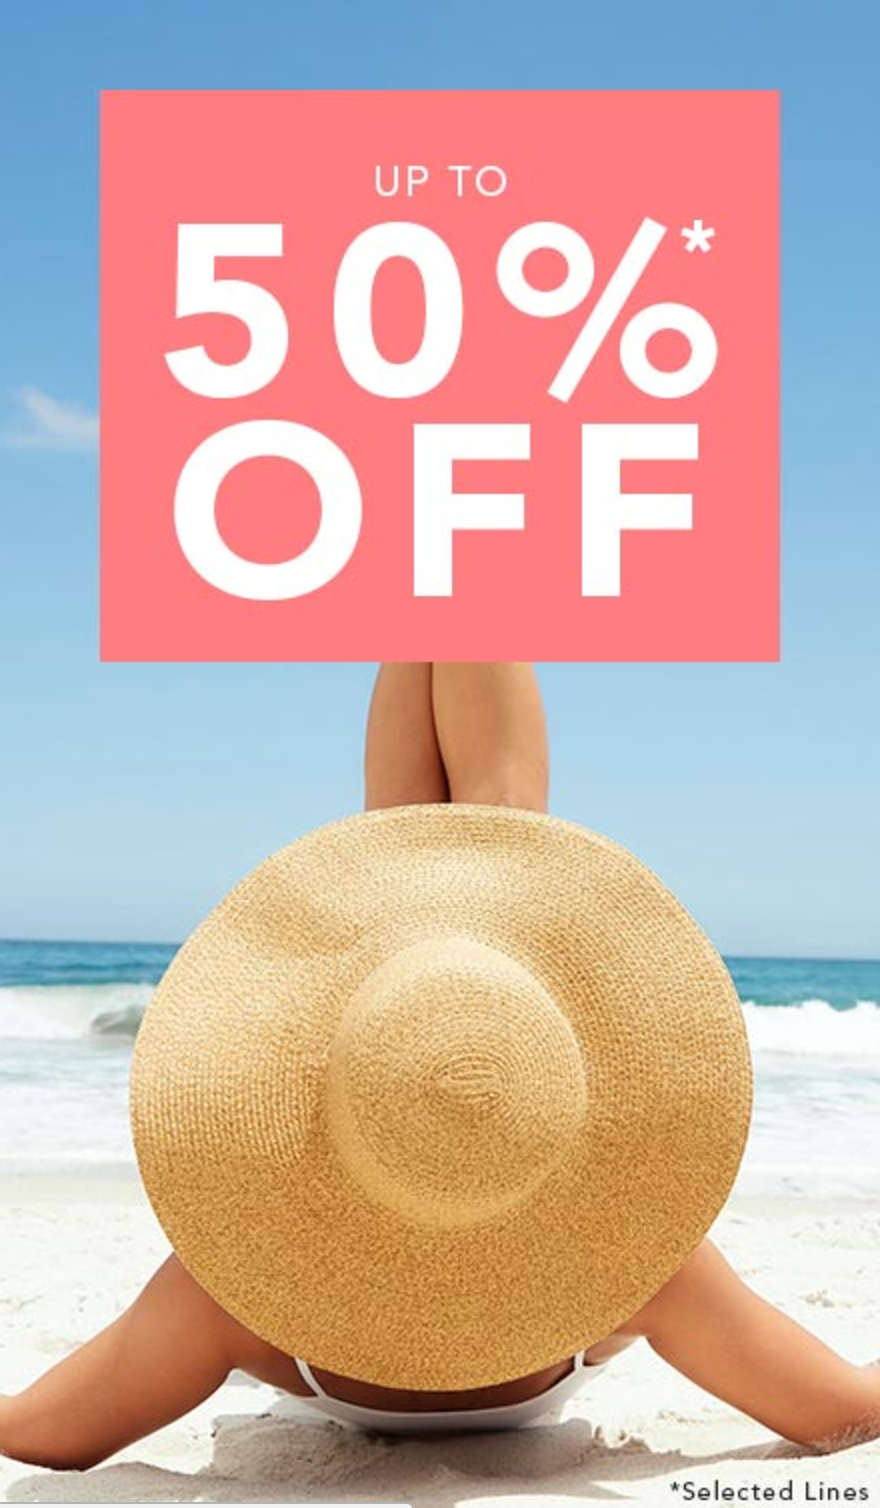 Marisota Marisota: up to 50% off ladies and gents products